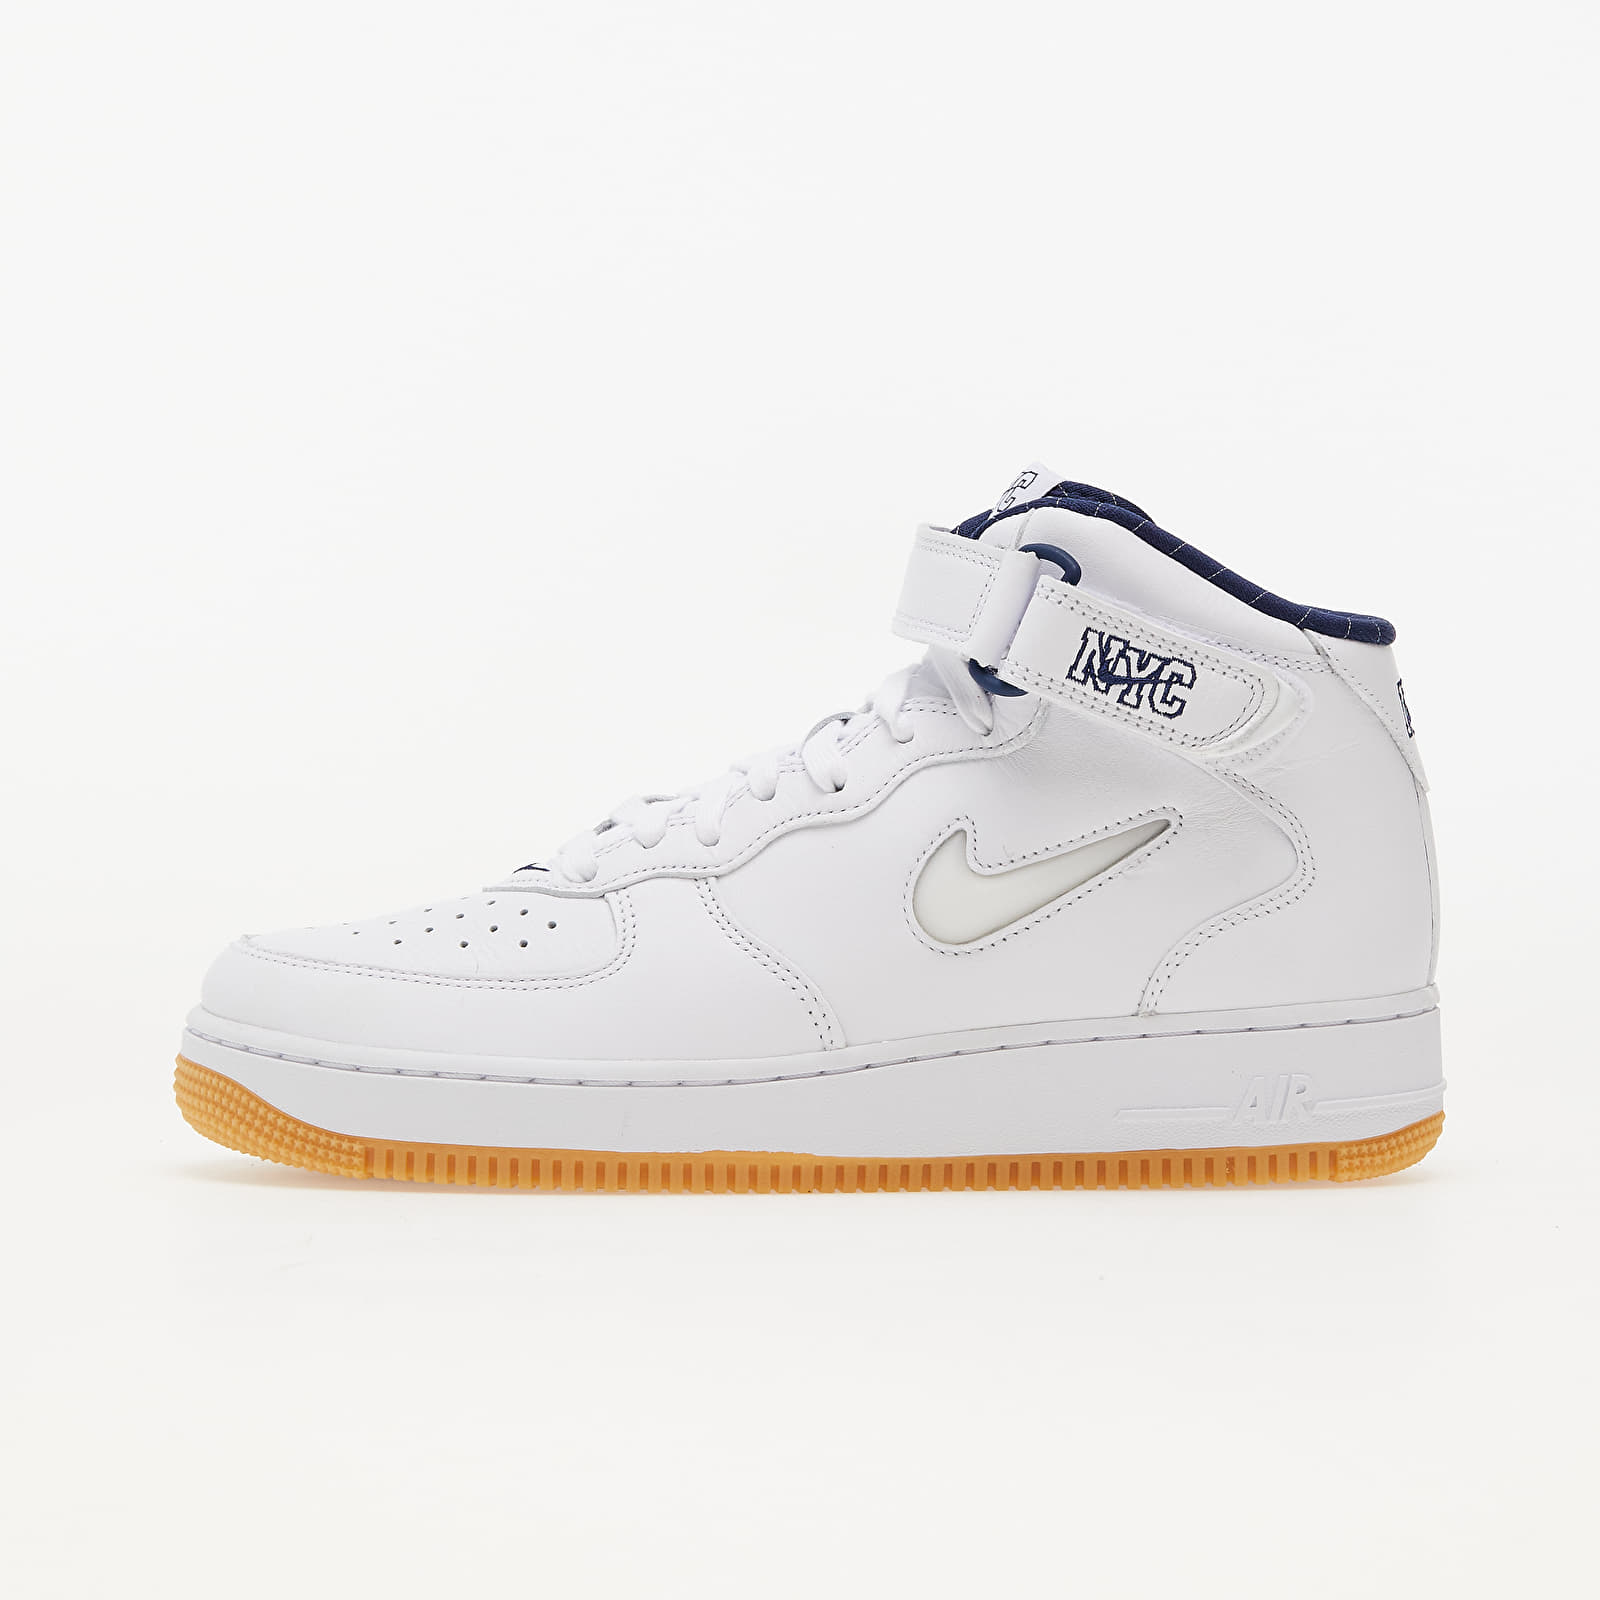 Chaussures et baskets homme Nike Air Force 1 Mid '07 QS White/ White-Midnight Navy-Gum Yellow